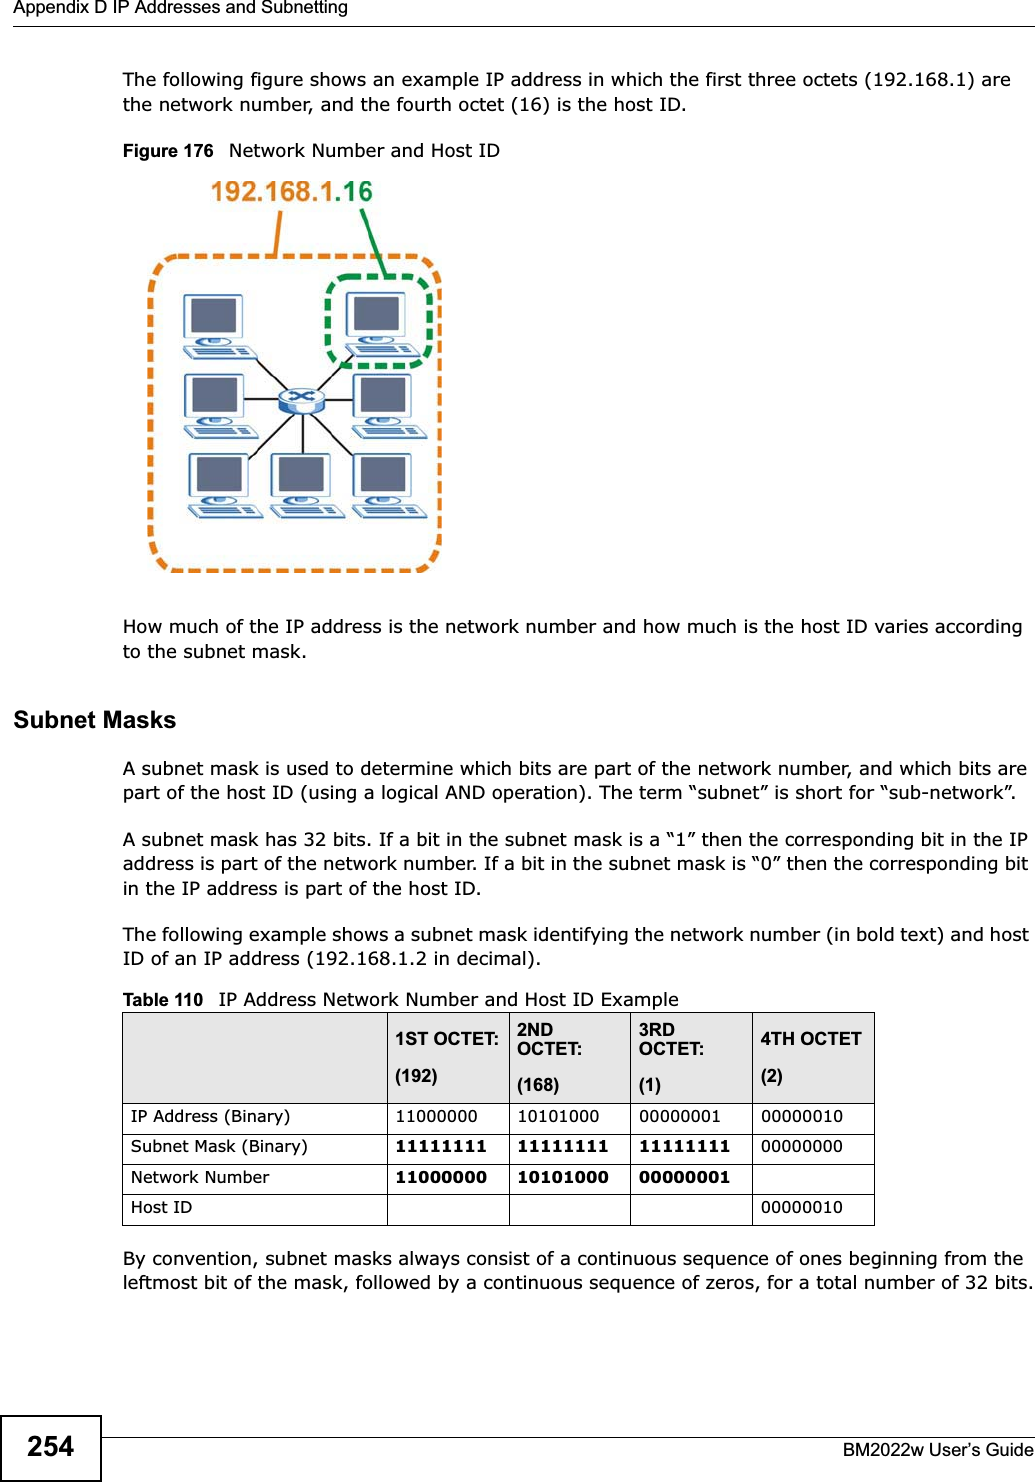 Appendix D IP Addresses and SubnettingBM2022w User’s Guide254The following figure shows an example IP address in which the first three octets (192.168.1) are the network number, and the fourth octet (16) is the host ID.Figure 176   Network Number and Host IDHow much of the IP address is the network number and how much is the host ID varies according to the subnet mask.  Subnet MasksA subnet mask is used to determine which bits are part of the network number, and which bits are part of the host ID (using a logical AND operation). The term “subnet” is short for “sub-network”.A subnet mask has 32 bits. If a bit in the subnet mask is a “1” then the corresponding bit in the IP address is part of the network number. If a bit in the subnet mask is “0” then the corresponding bit in the IP address is part of the host ID. The following example shows a subnet mask identifying the network number (in bold text) and host ID of an IP address (192.168.1.2 in decimal).By convention, subnet masks always consist of a continuous sequence of ones beginning from the leftmost bit of the mask, followed by a continuous sequence of zeros, for a total number of 32 bits.Table 110   IP Address Network Number and Host ID Example1ST OCTET:(192)2ND OCTET:(168)3RD OCTET:(1)4TH OCTET(2)IP Address (Binary) 11000000 10101000 00000001 00000010Subnet Mask (Binary) 11111111 11111111 11111111 00000000Network Number 11000000 10101000 00000001Host ID 00000010